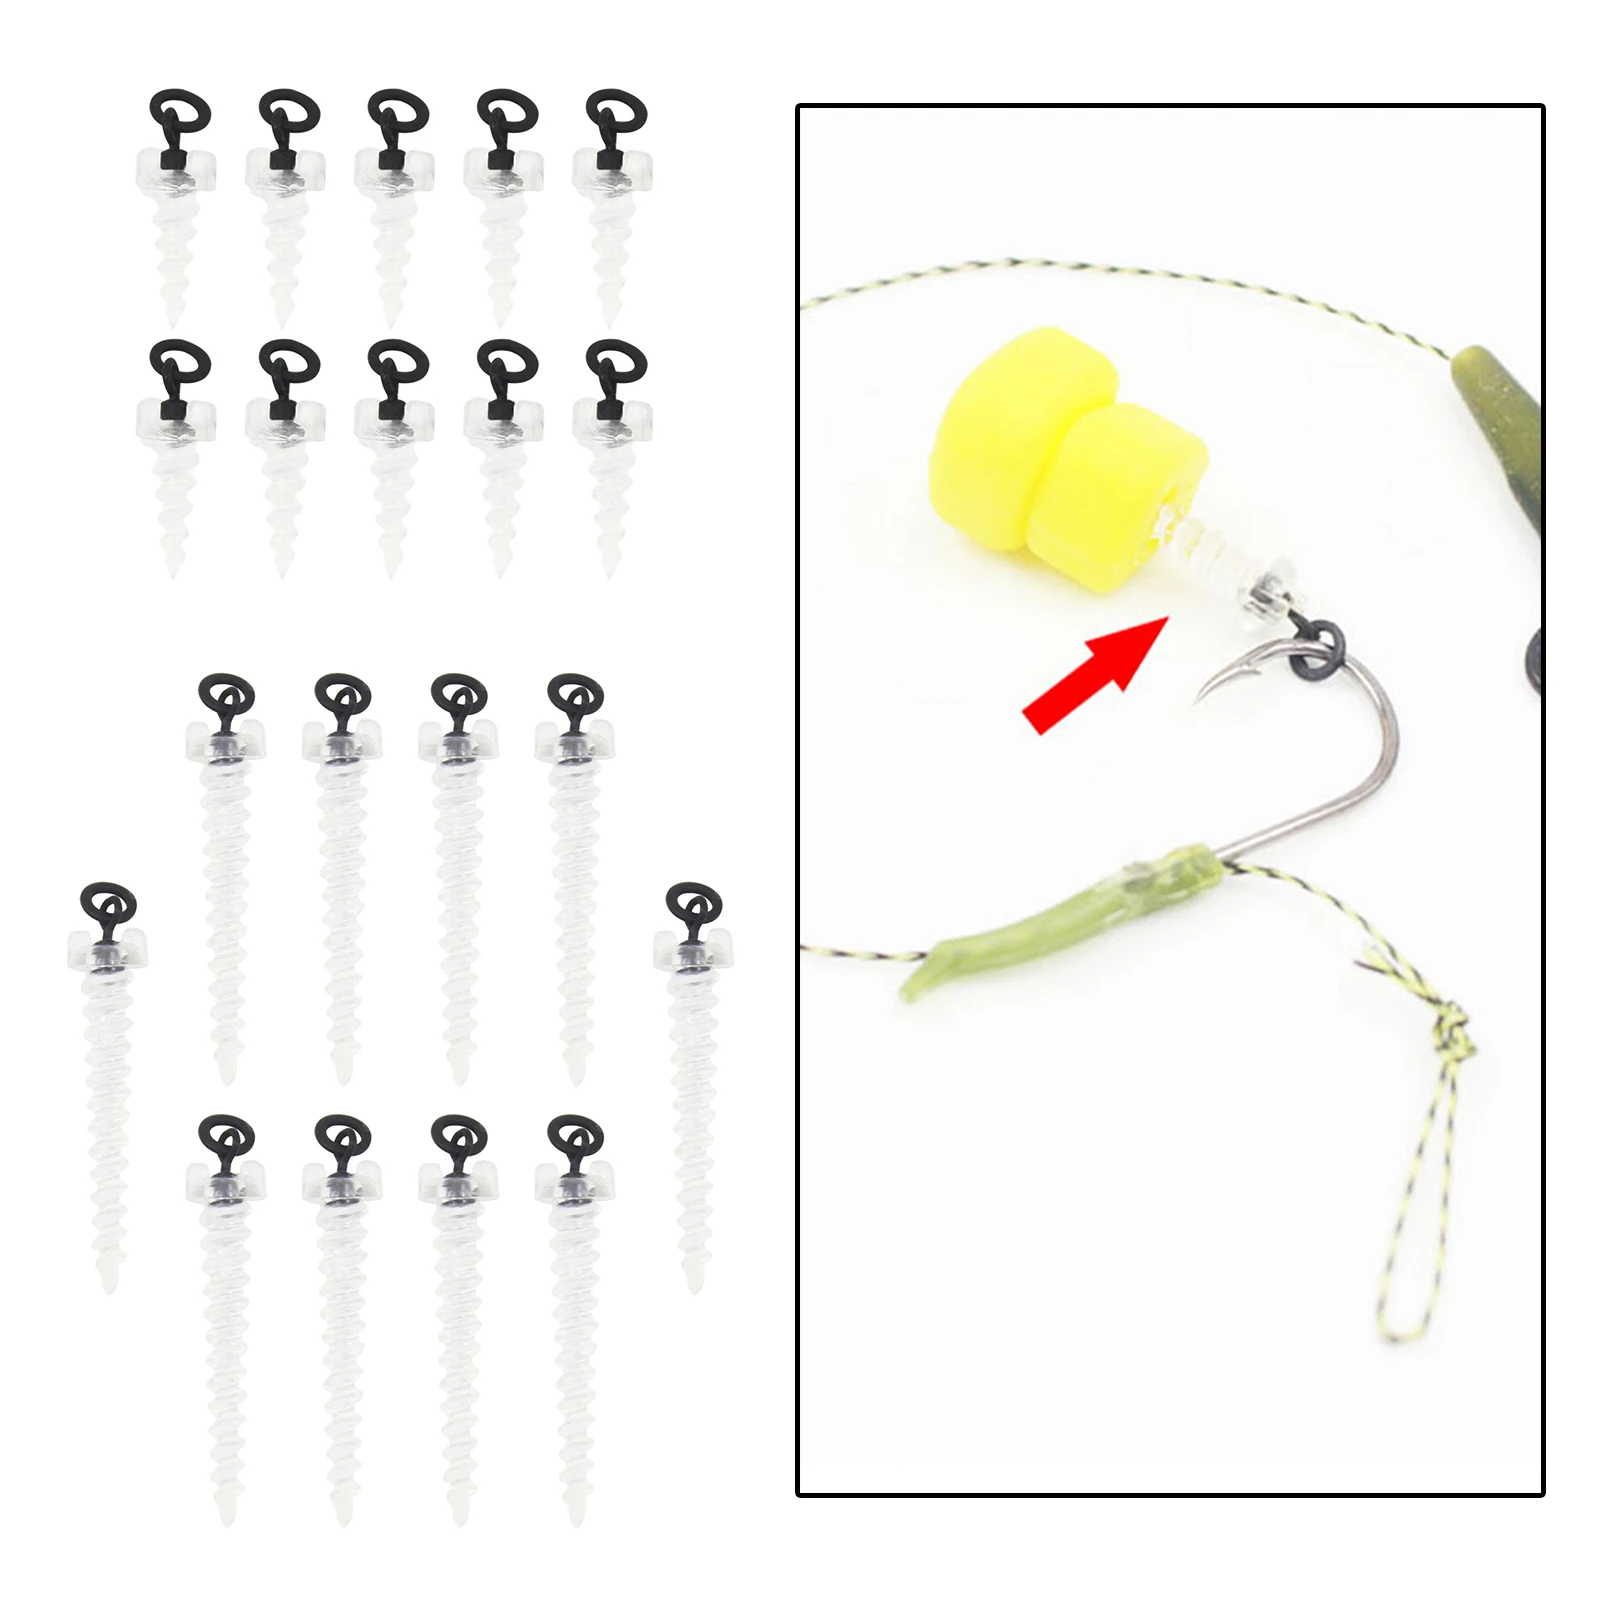 10Pcs 15mm Bait Screw Swivel with Ring Swivel Terminal Tackle Lure Pegs Rig Surface Bait 360  Clear for Carp Fishing Pellets